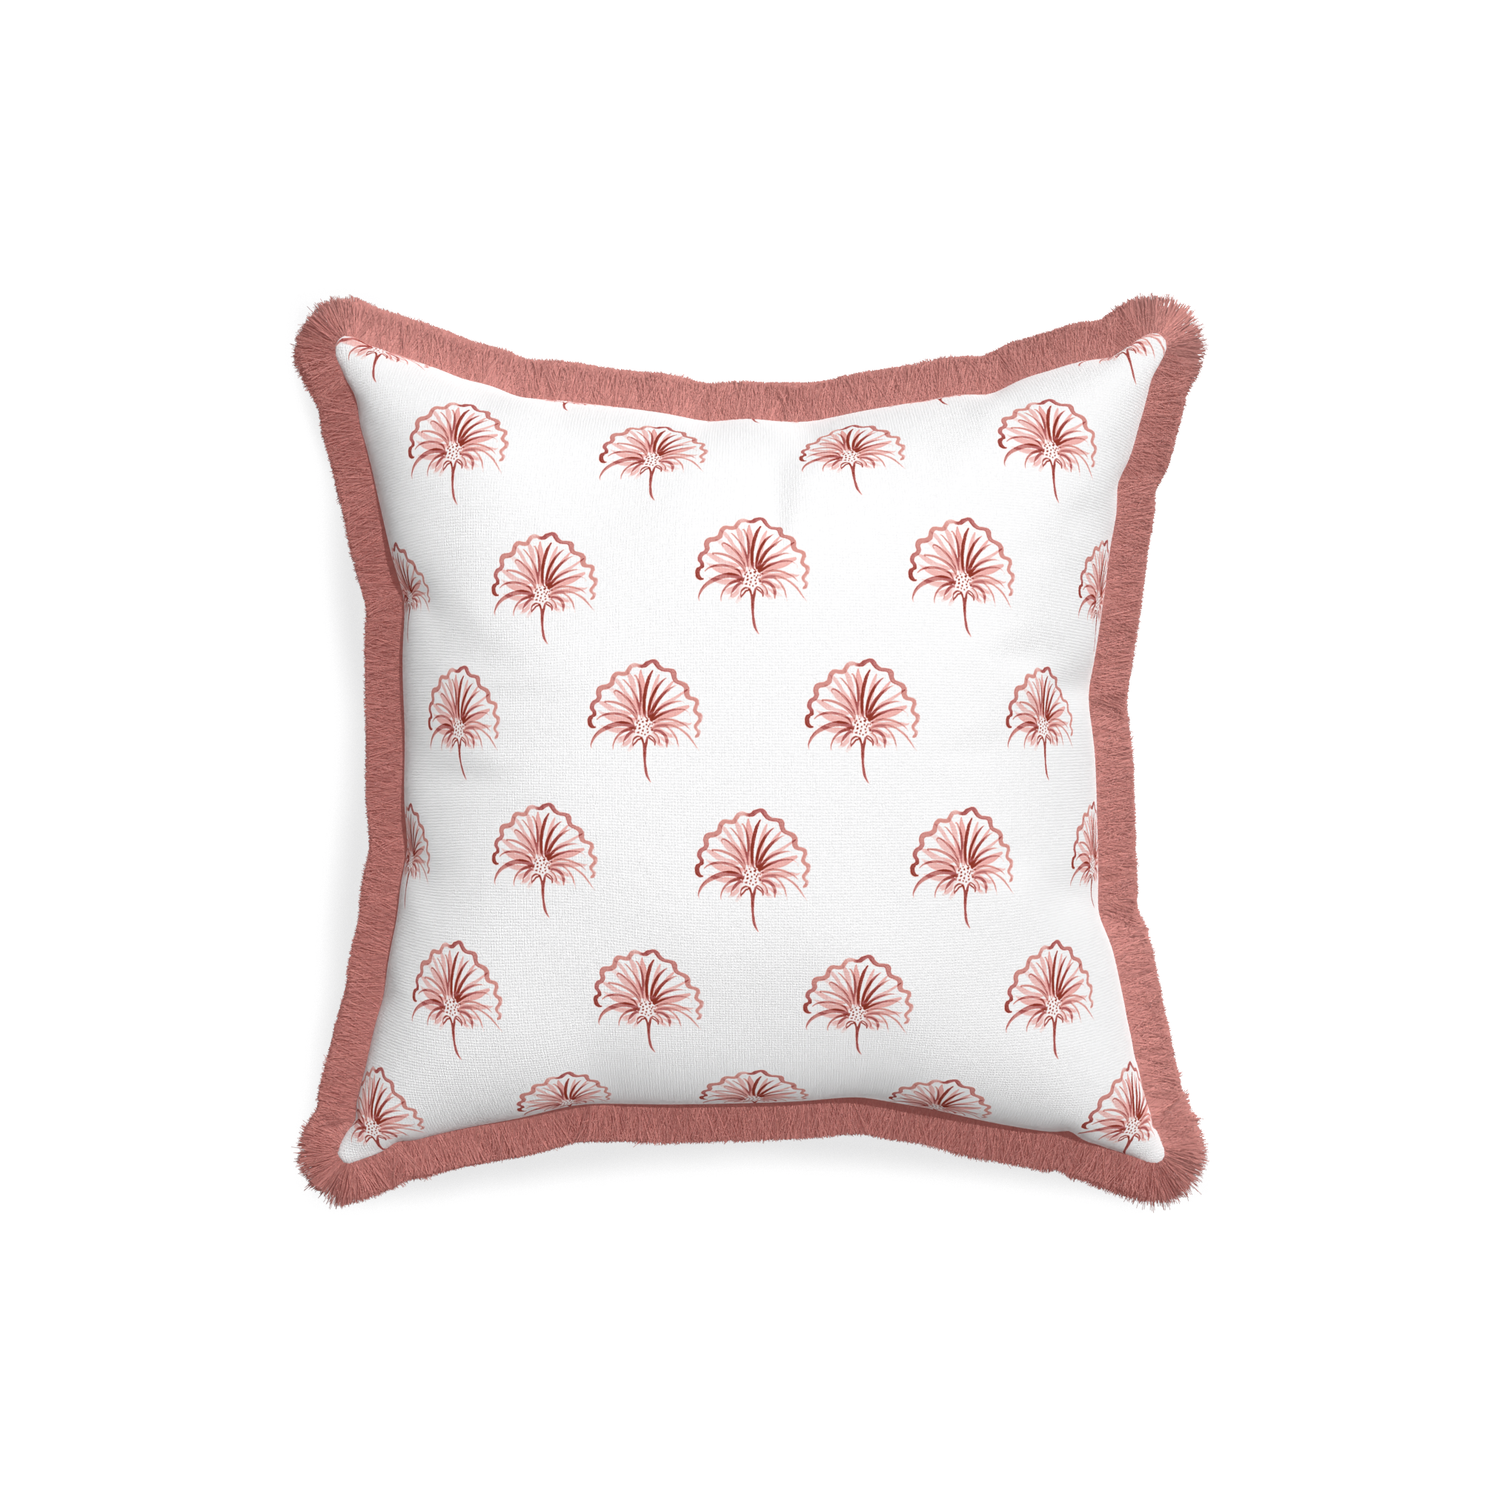 18-square penelope rose custom floral pinkpillow with d fringe on white background